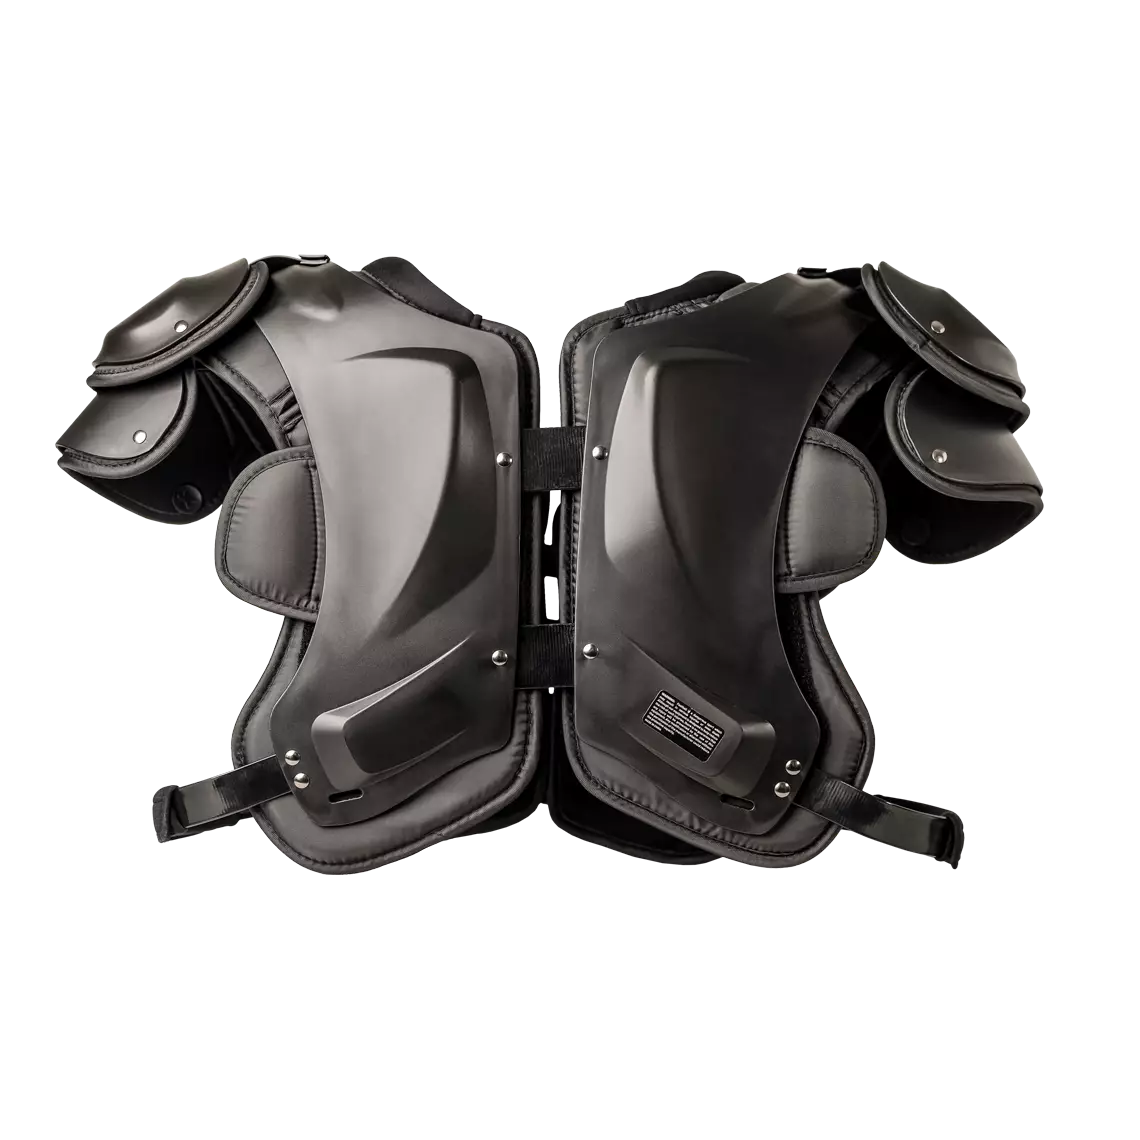 Backside view Xenith Velocity 2 Pro shoulder pads.